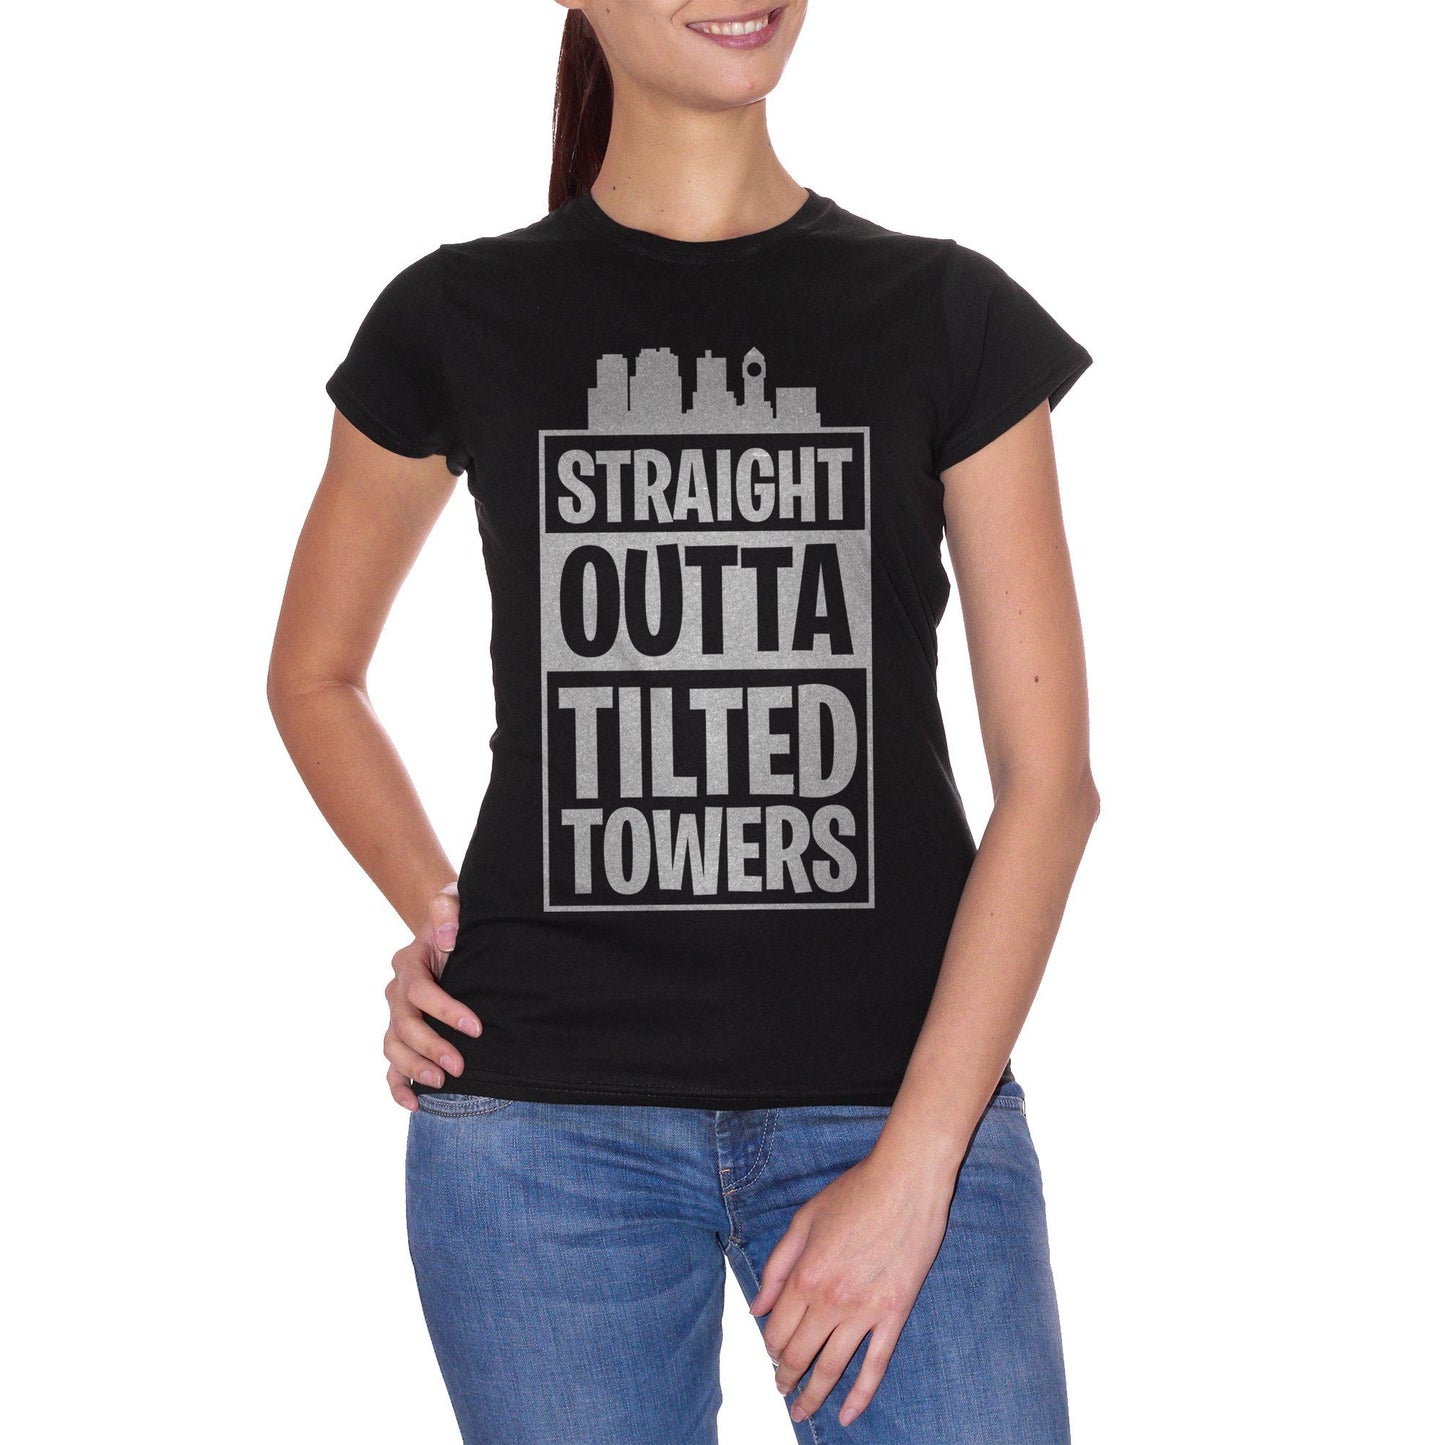 Black T-Shirt Straight Outta Tilted Towers - SOCIAL CucShop